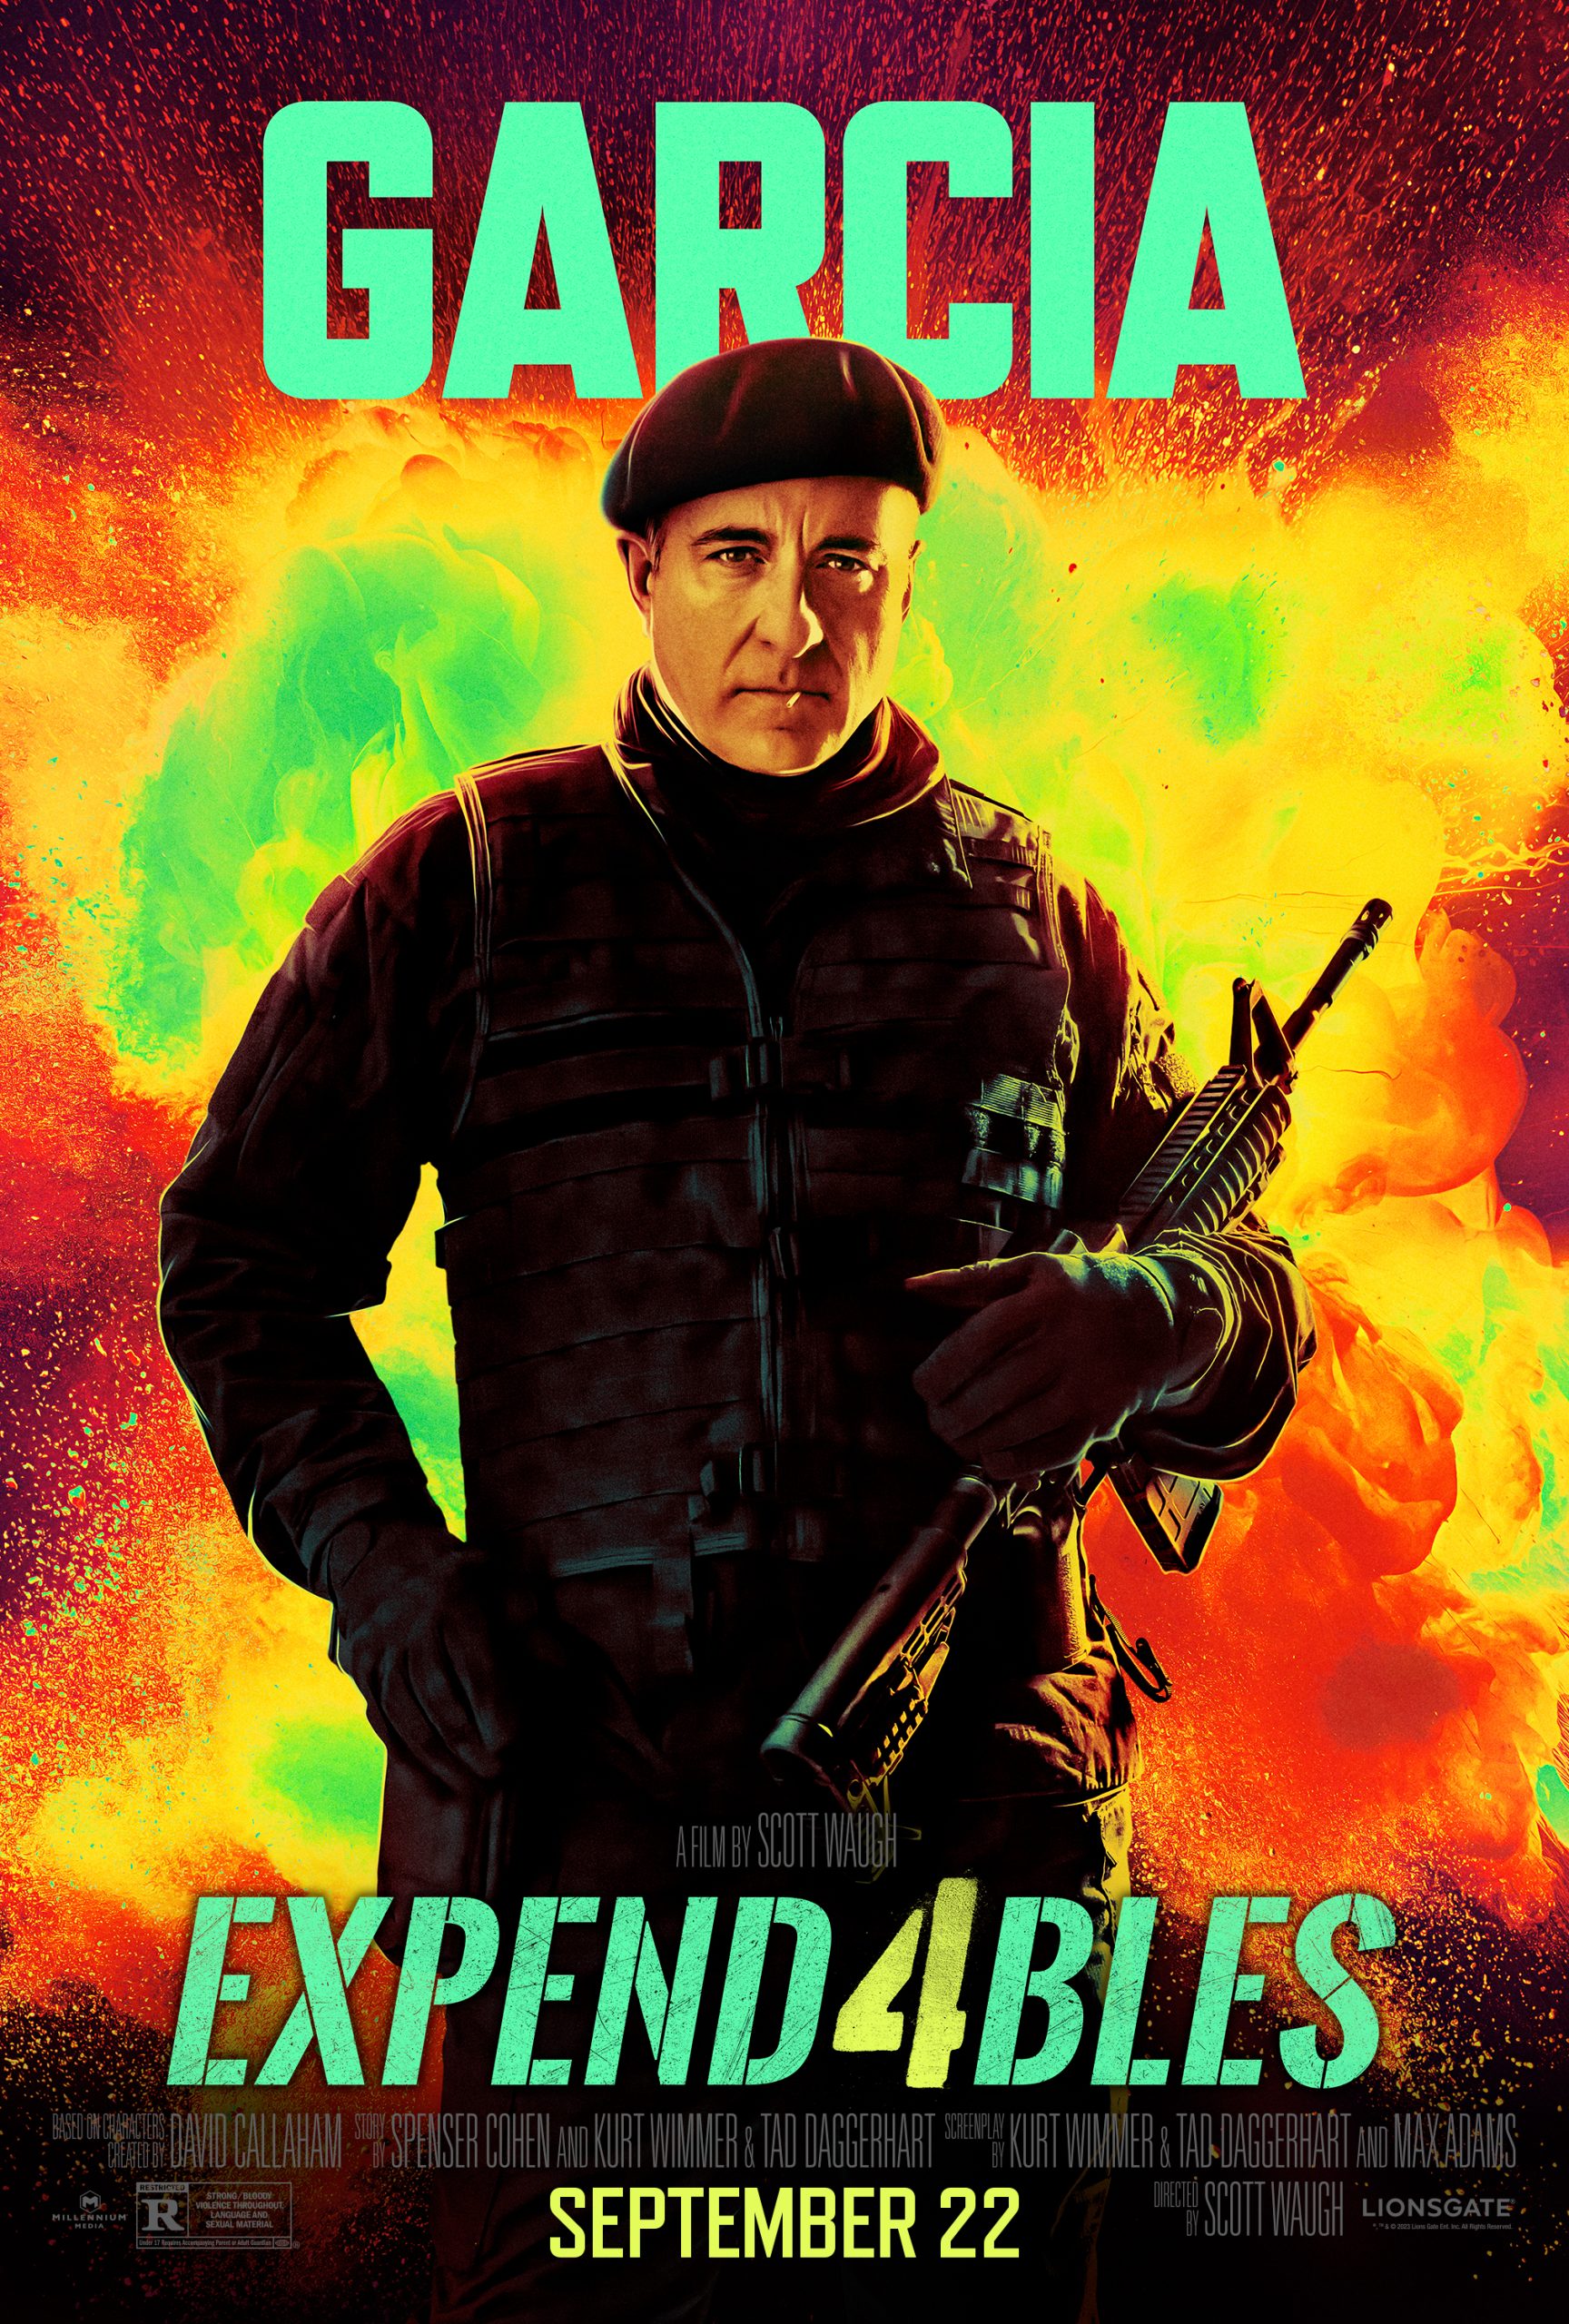 EXPENDABLES 